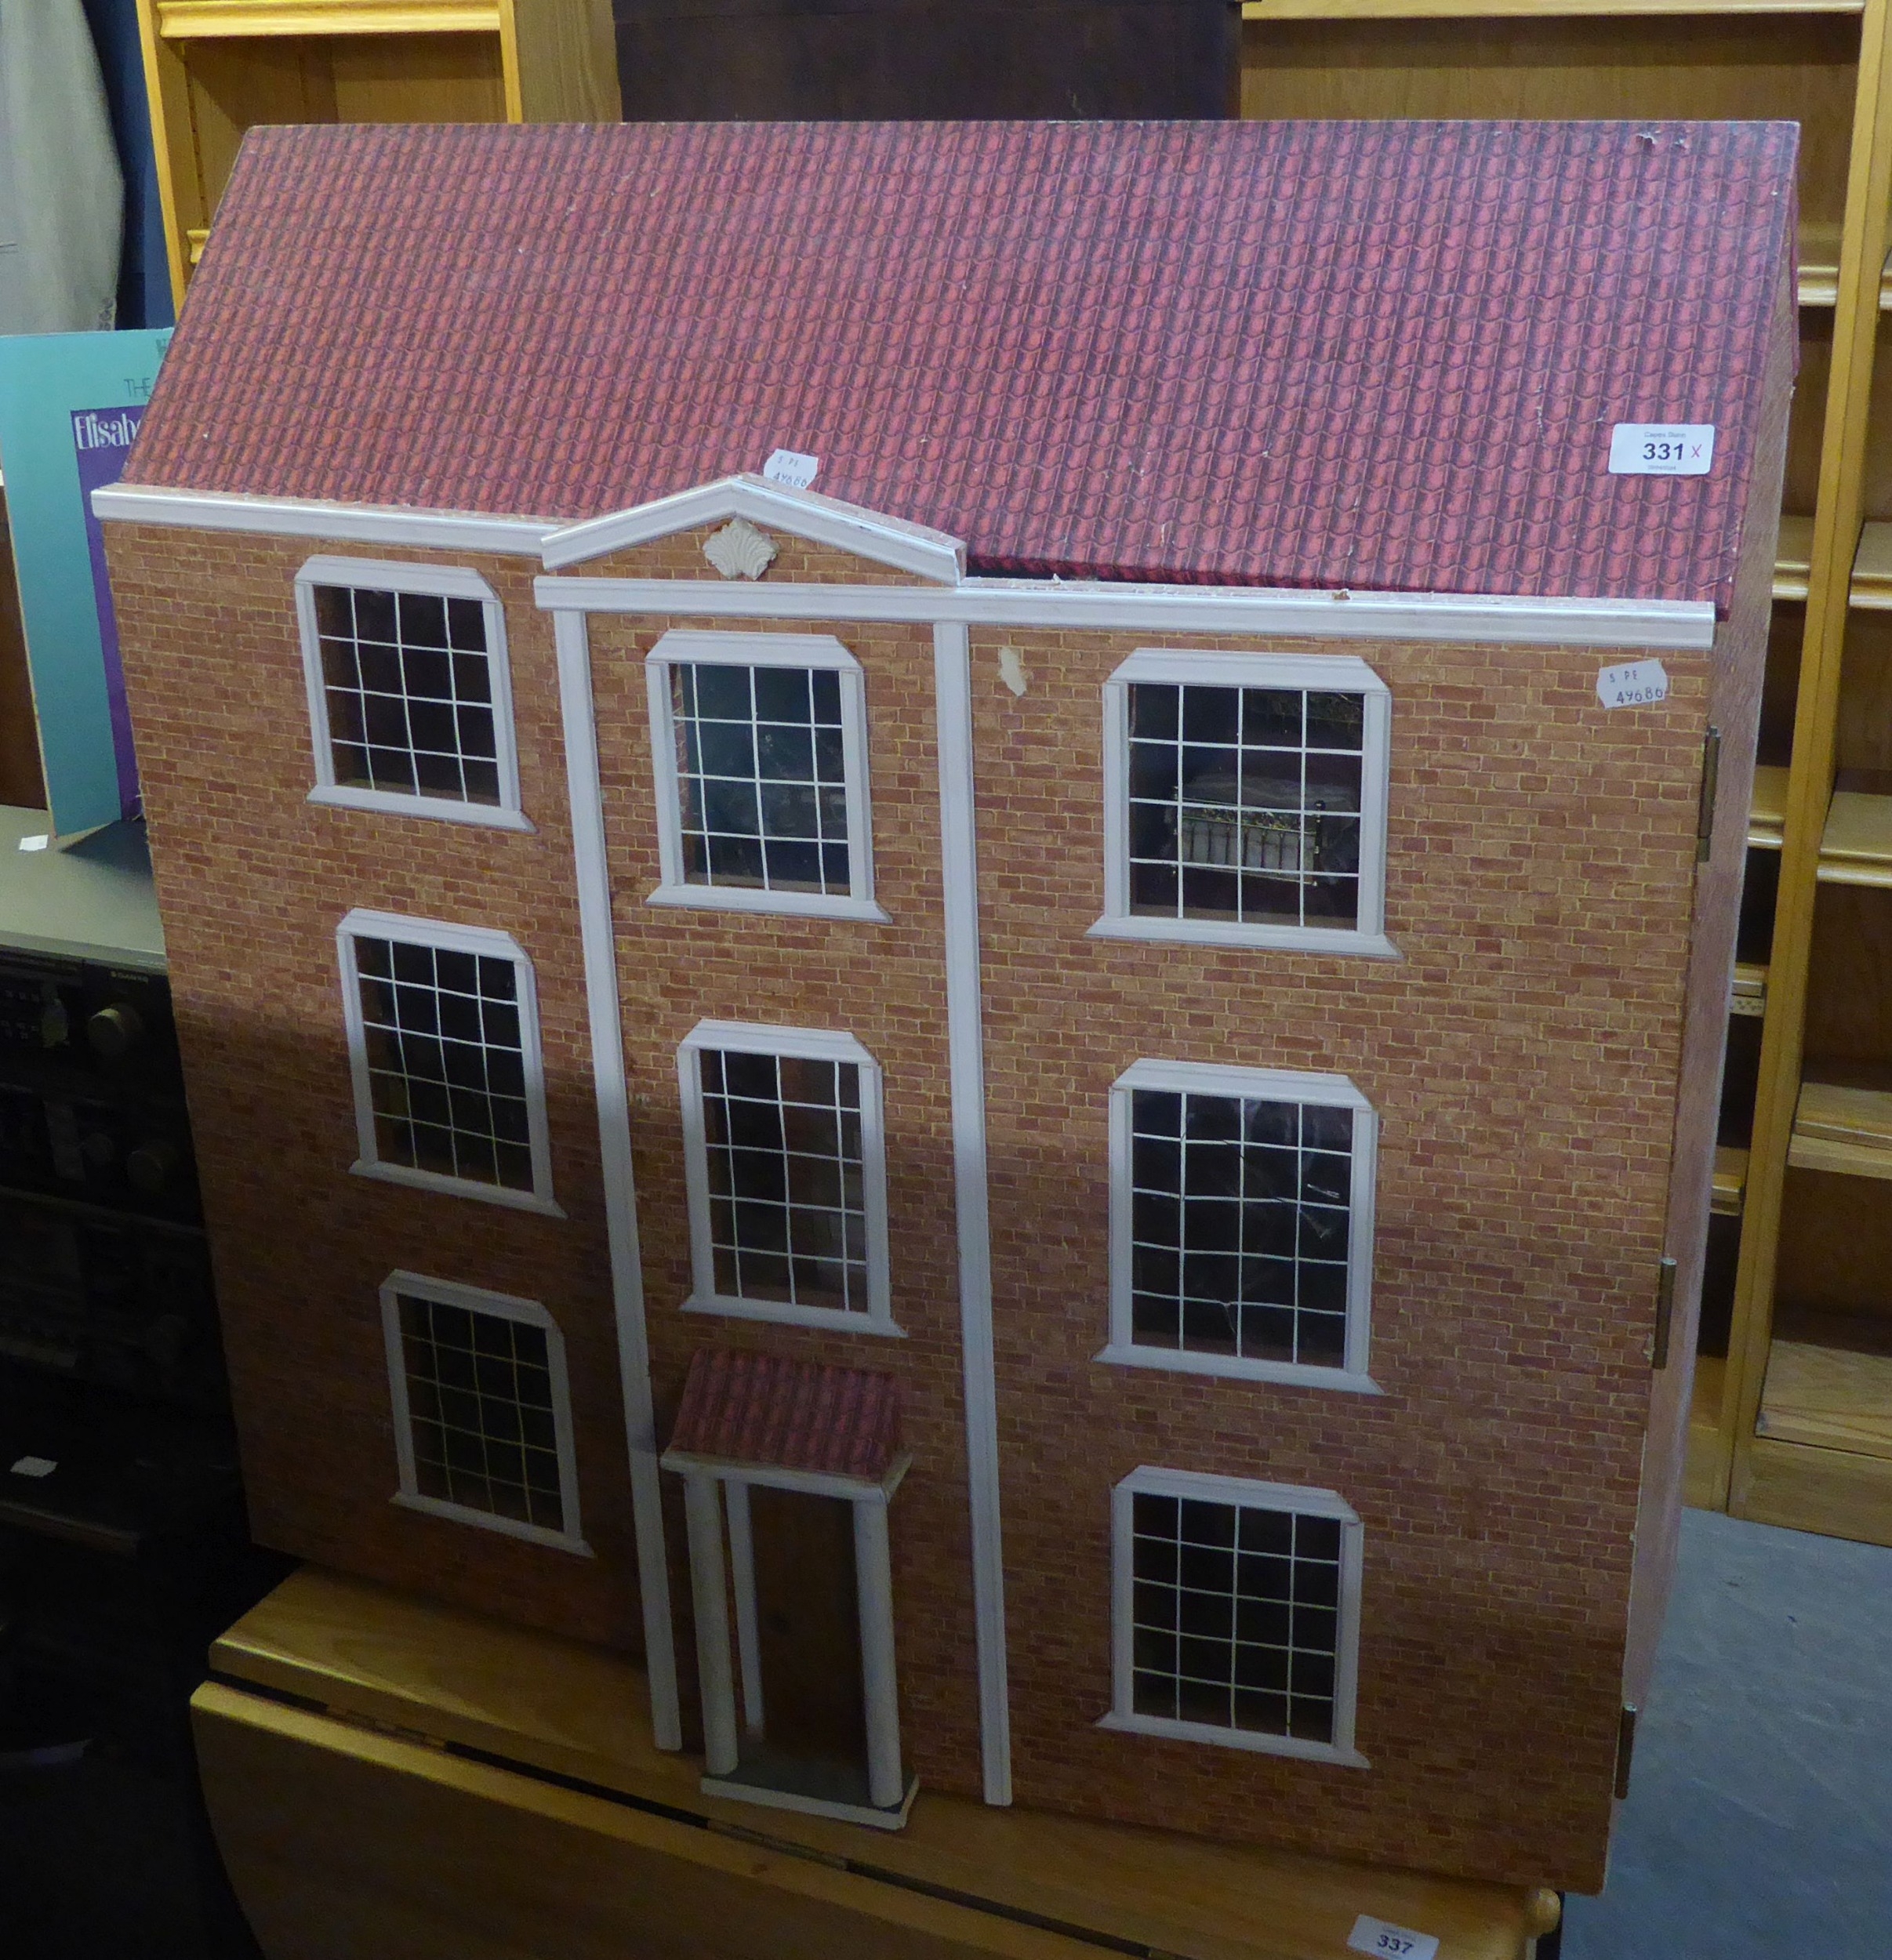 A THREE STOREY DOLLS HOUSE, HAVING TWO FULLY OPENING FRONT DOORS, AND A SELECTION OF DOLLS HOUSE